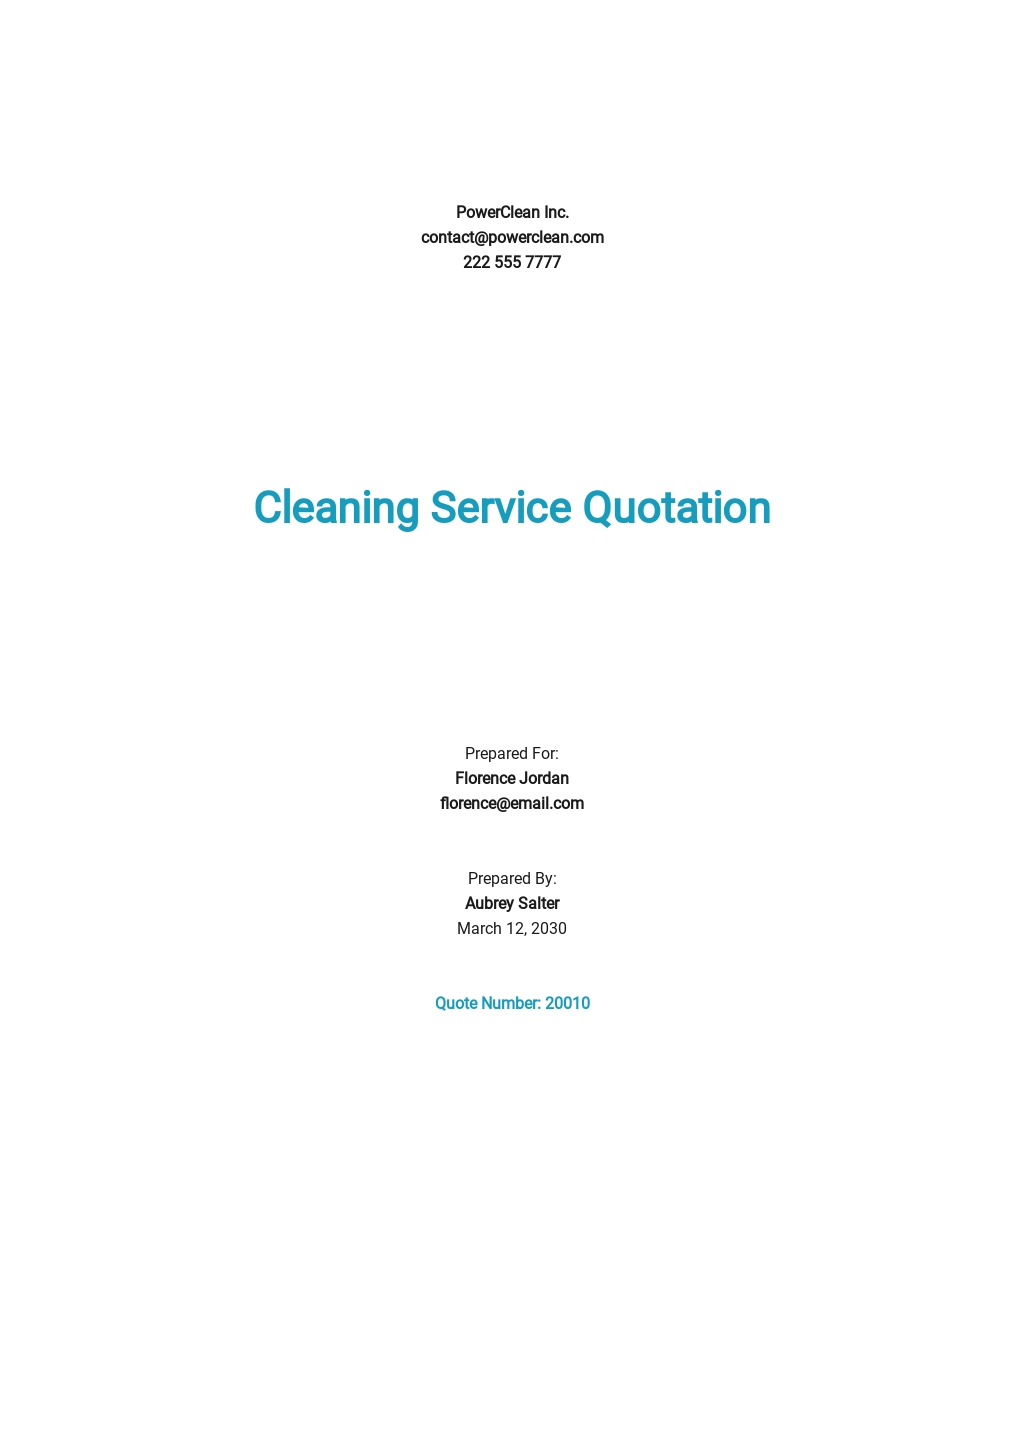 Free Request Quotation for Cleaning Services Template.jpe